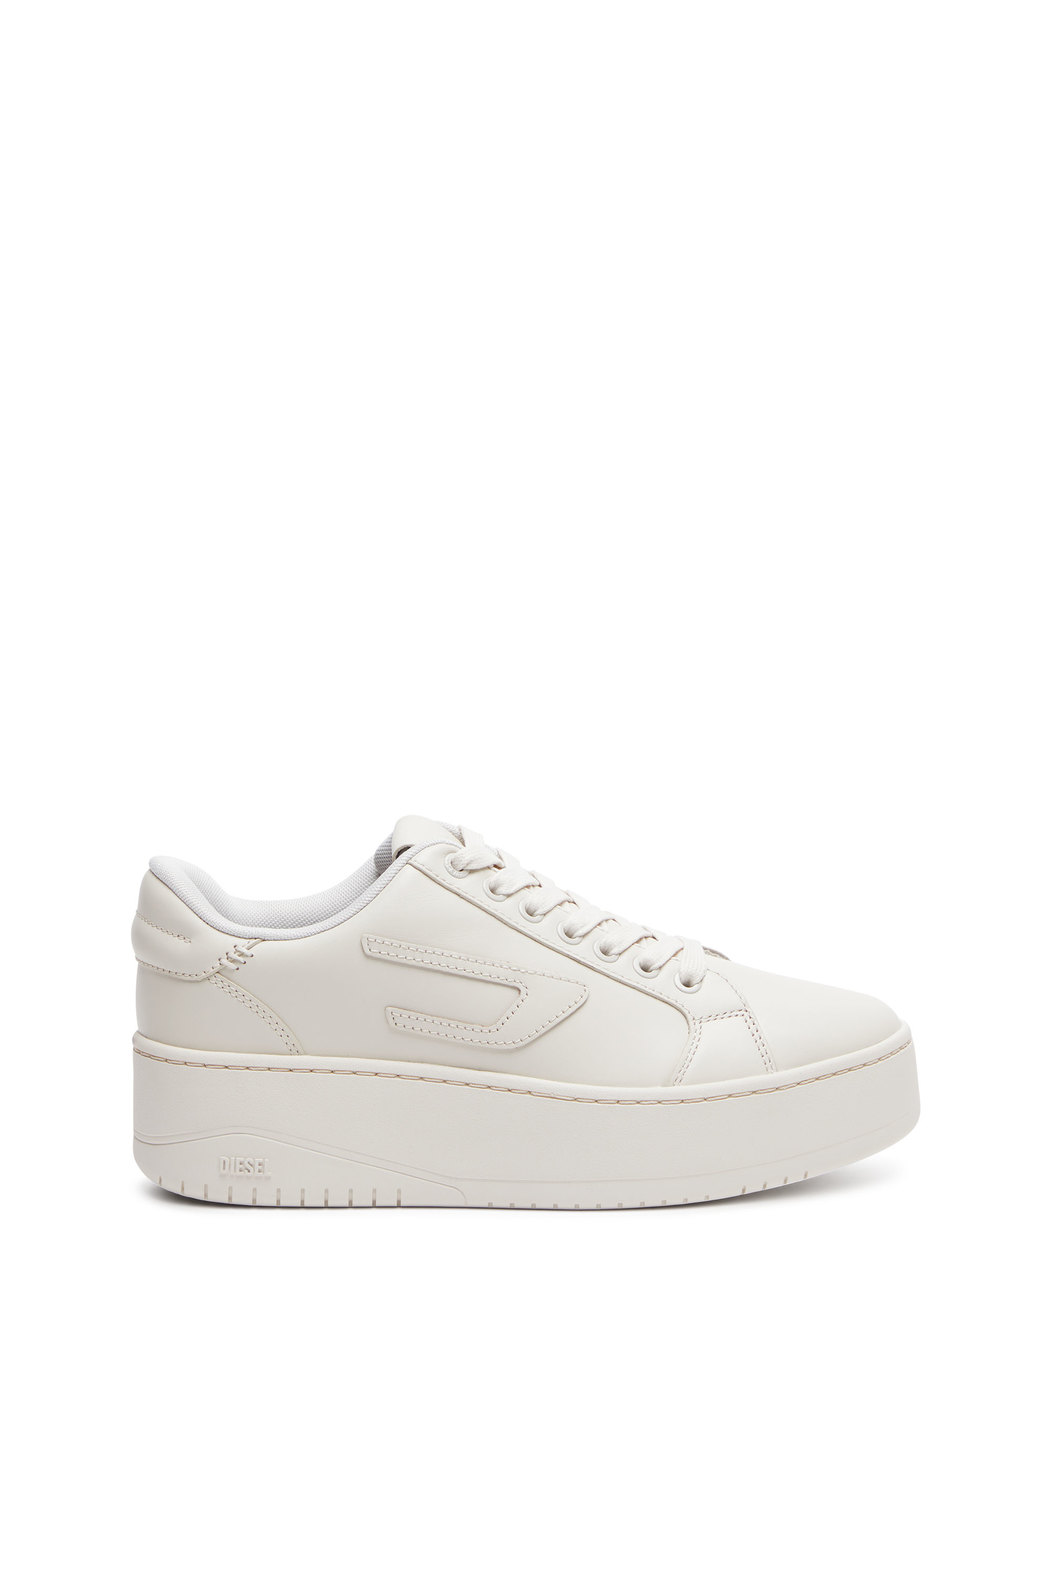 Flatform sneakers in leather